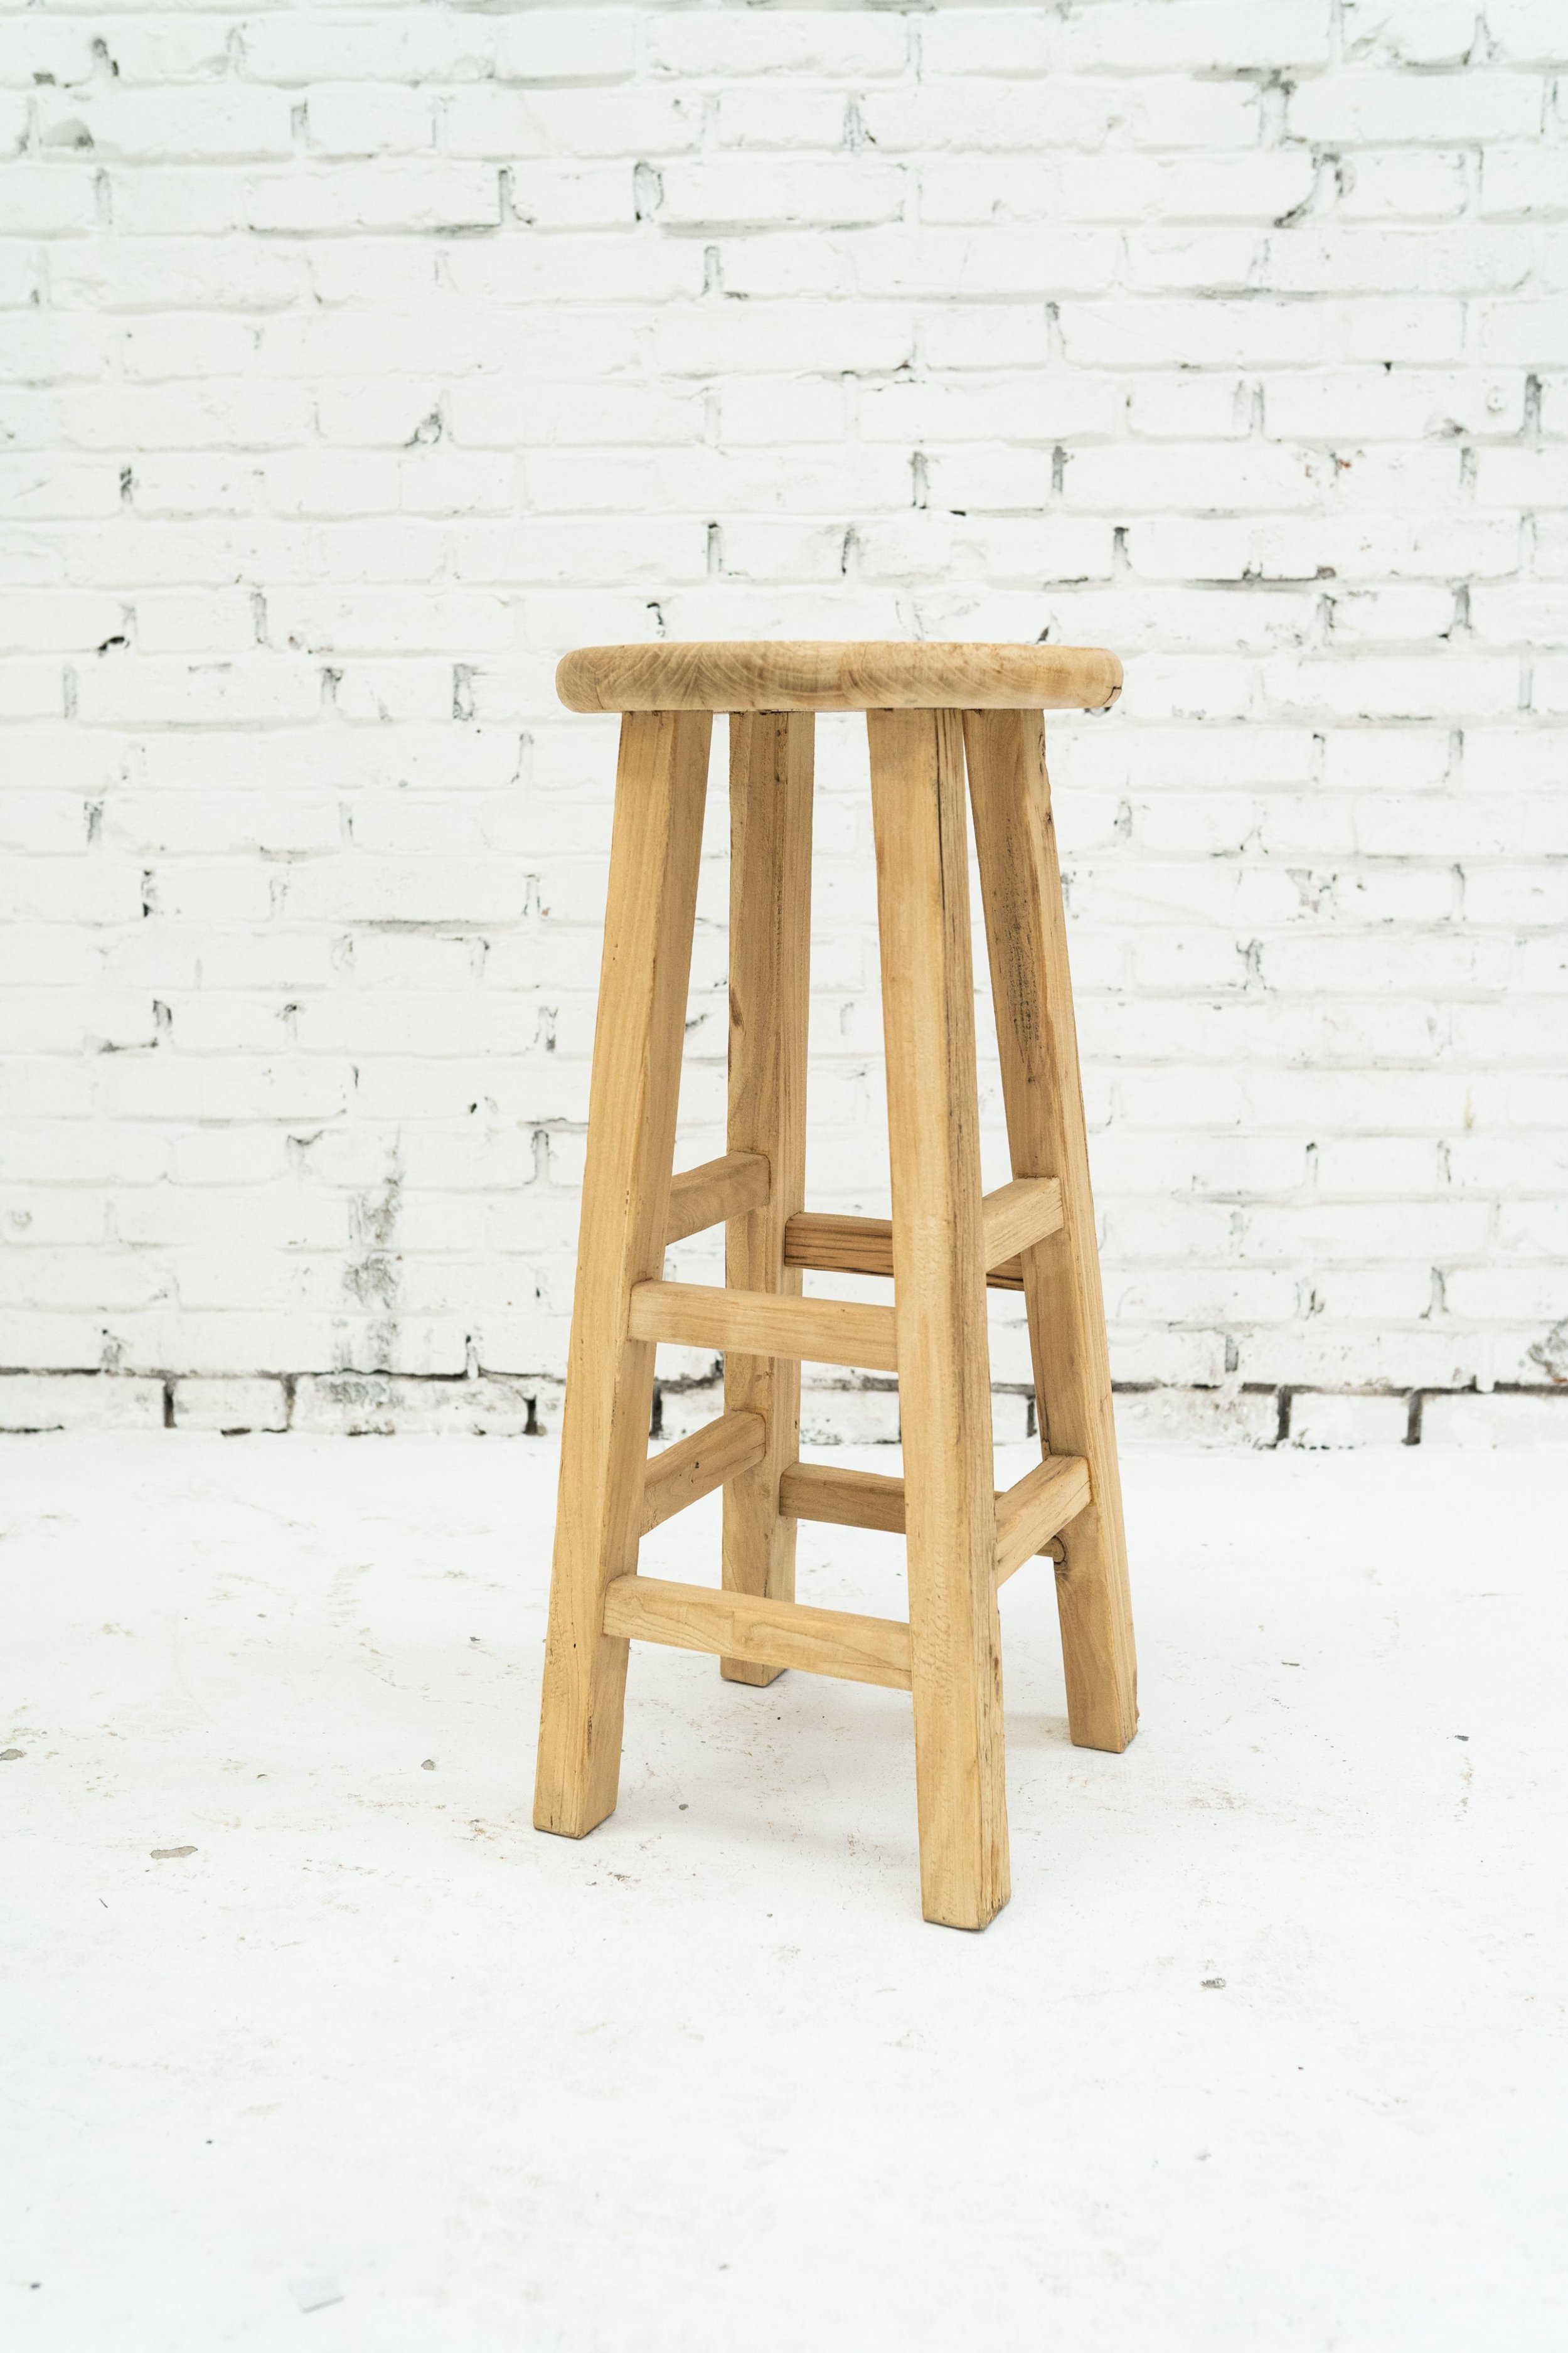 2 x Tall Elm Stool: Stunning wooden bar stools from the Heibei province of China. - Image 2 of 4